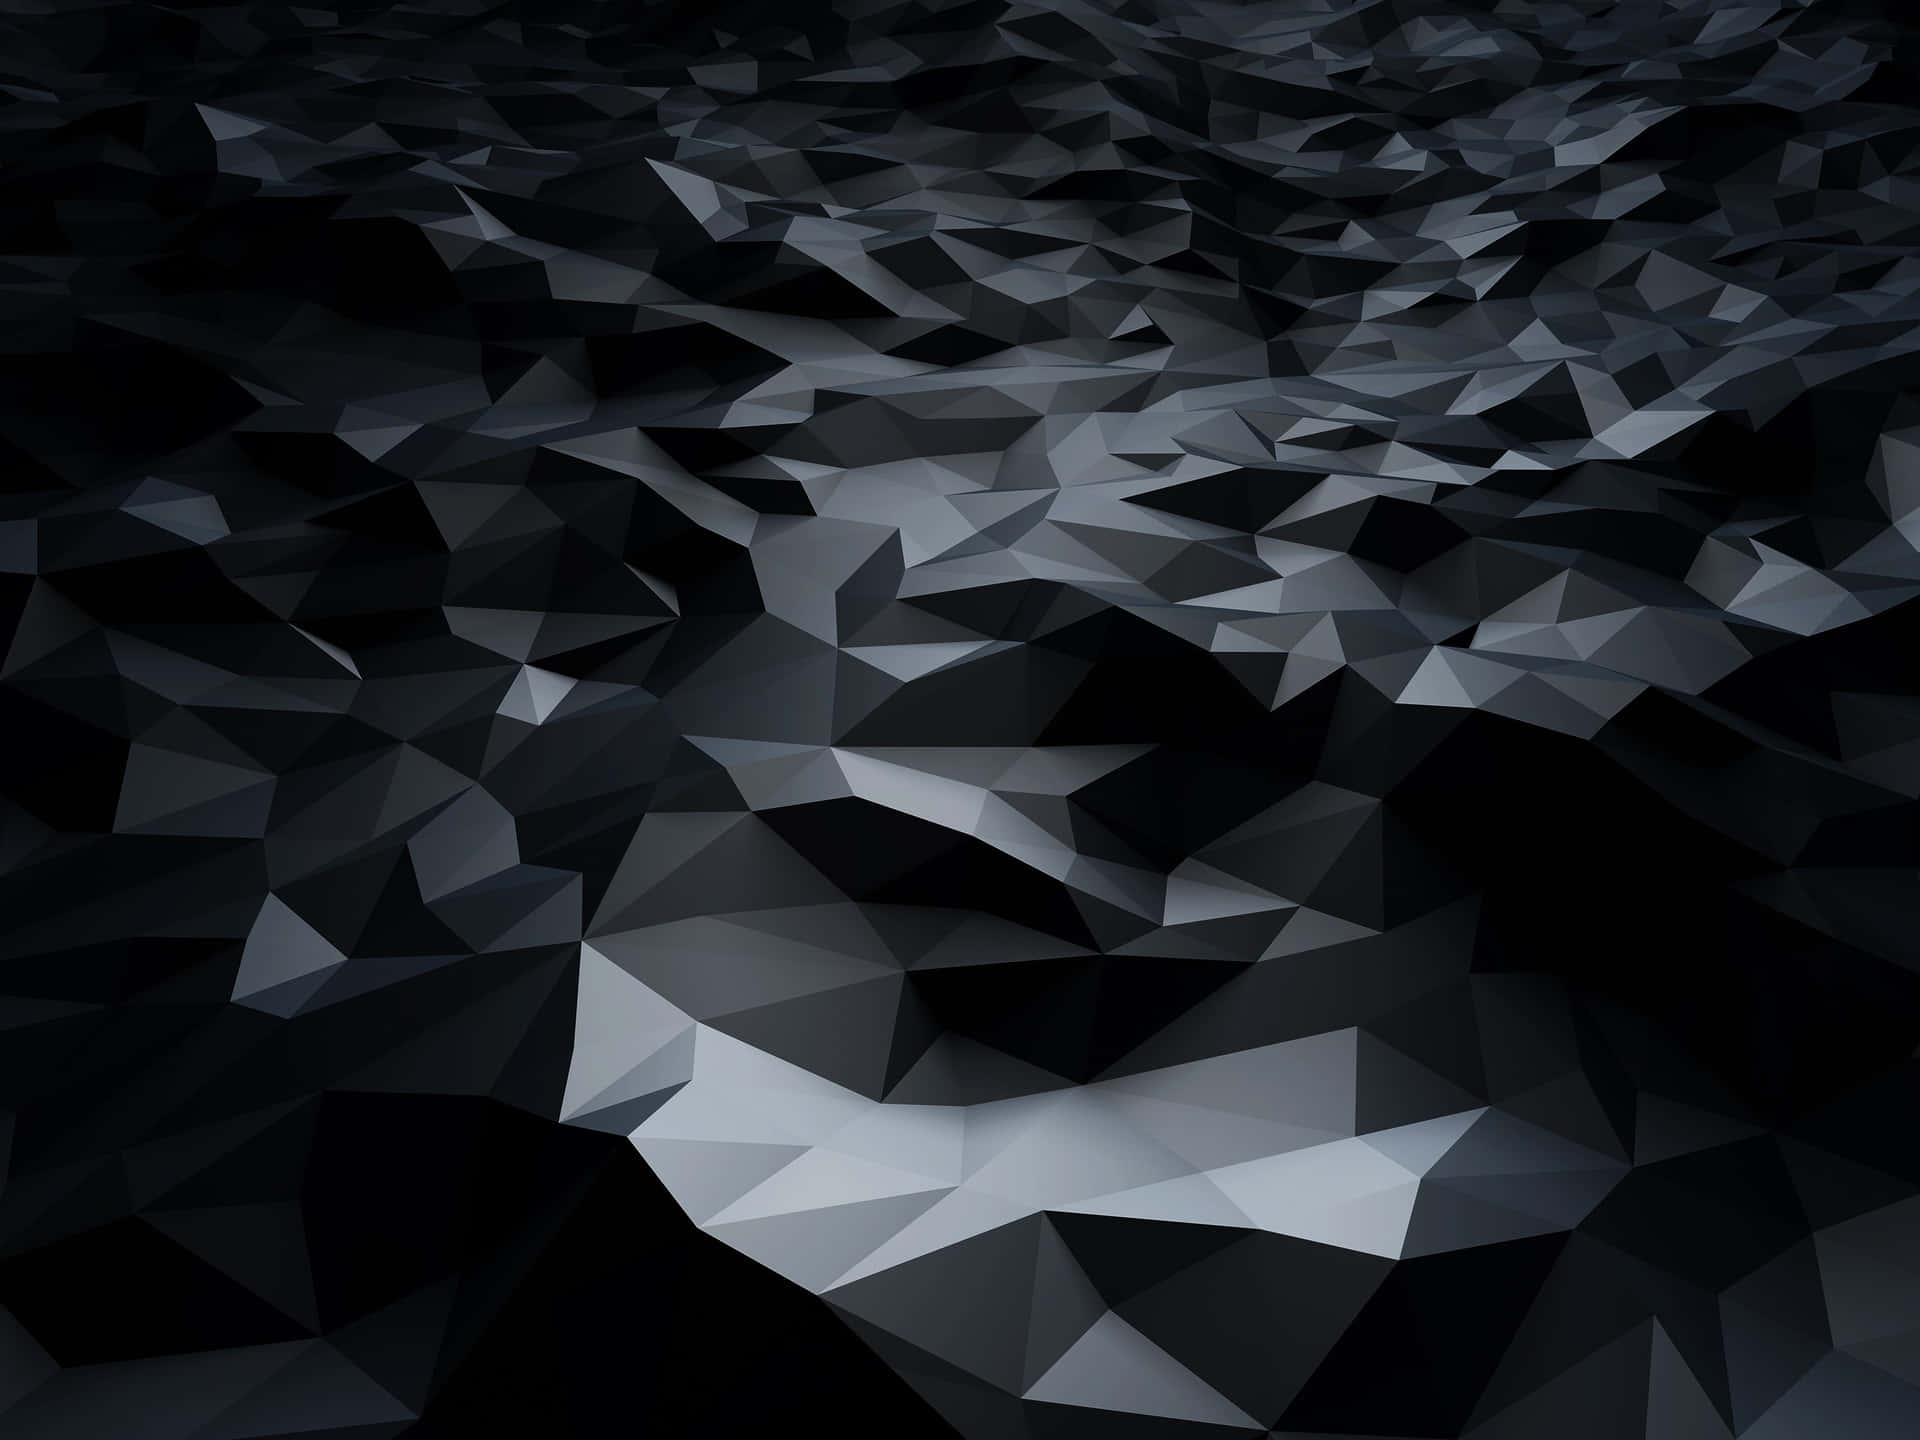 "A low poly background that celebrates the beauty of art in simplicity"